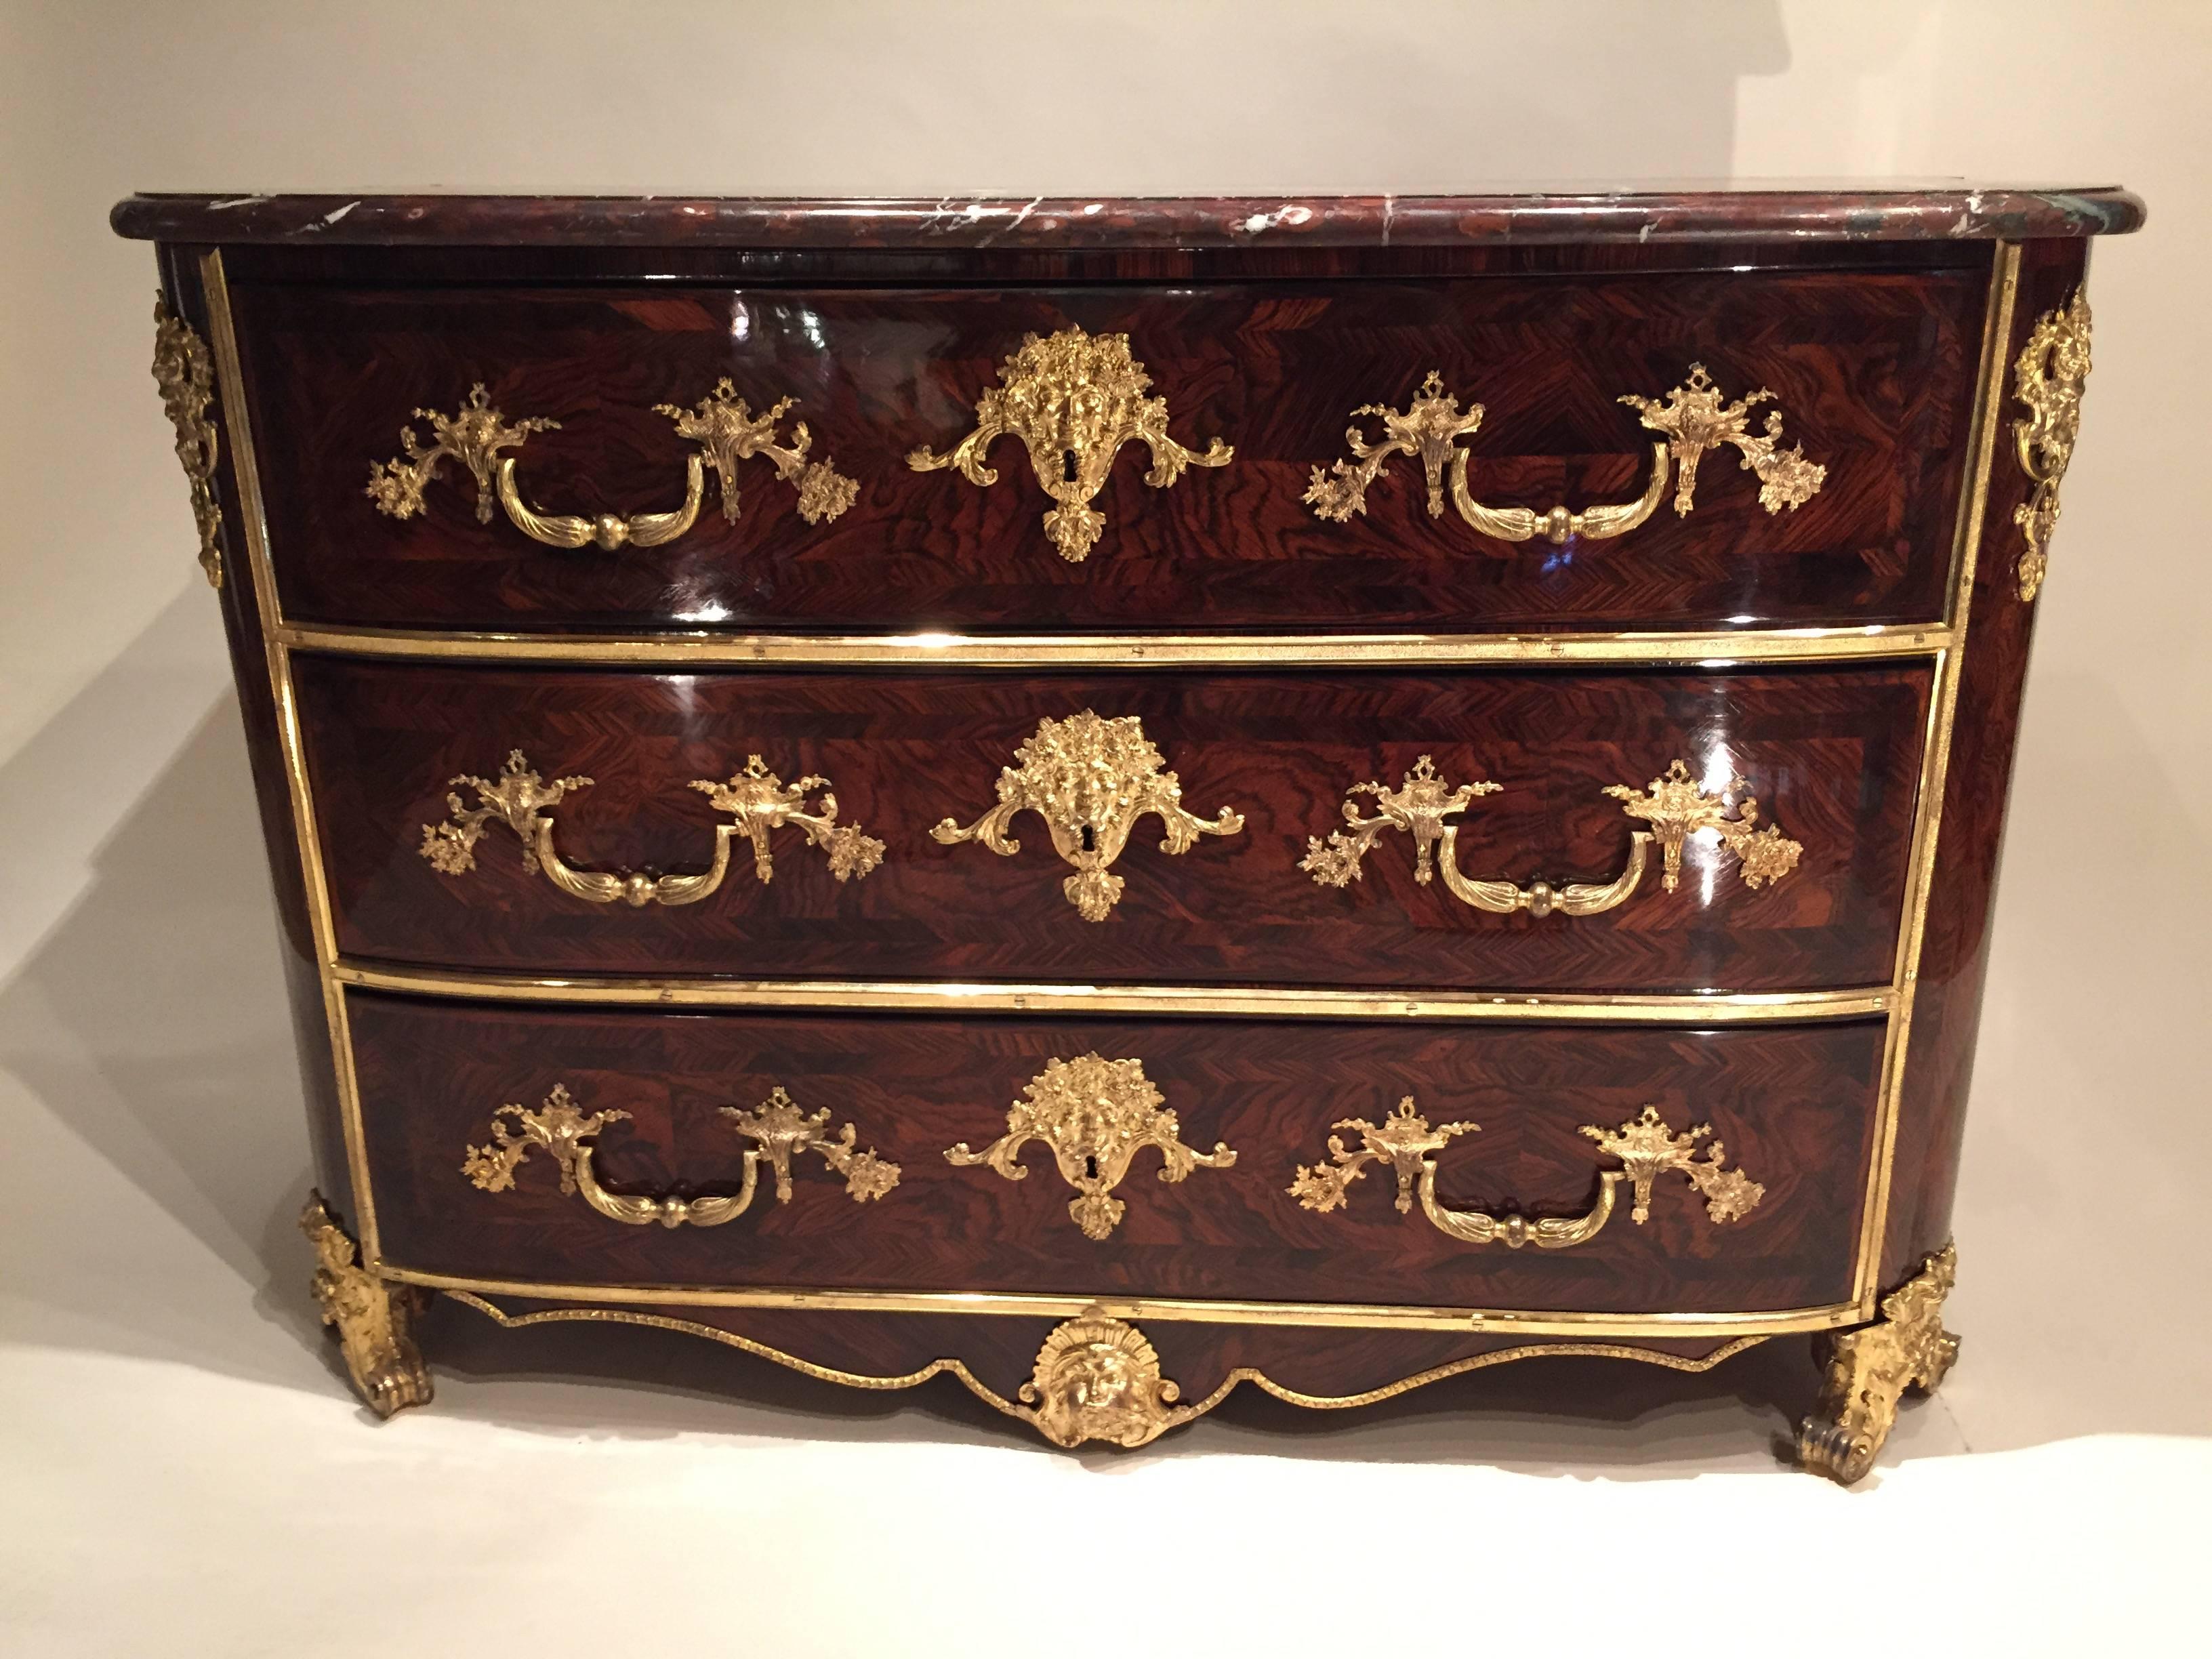 Exceptionally French Fine Commode, Sun King Period Circa 1715
Exceptionally commode rosewood veneer opening by three drawers separated by bronze frames.
The front uprights with wide curves in the extension of the sides, rear projections